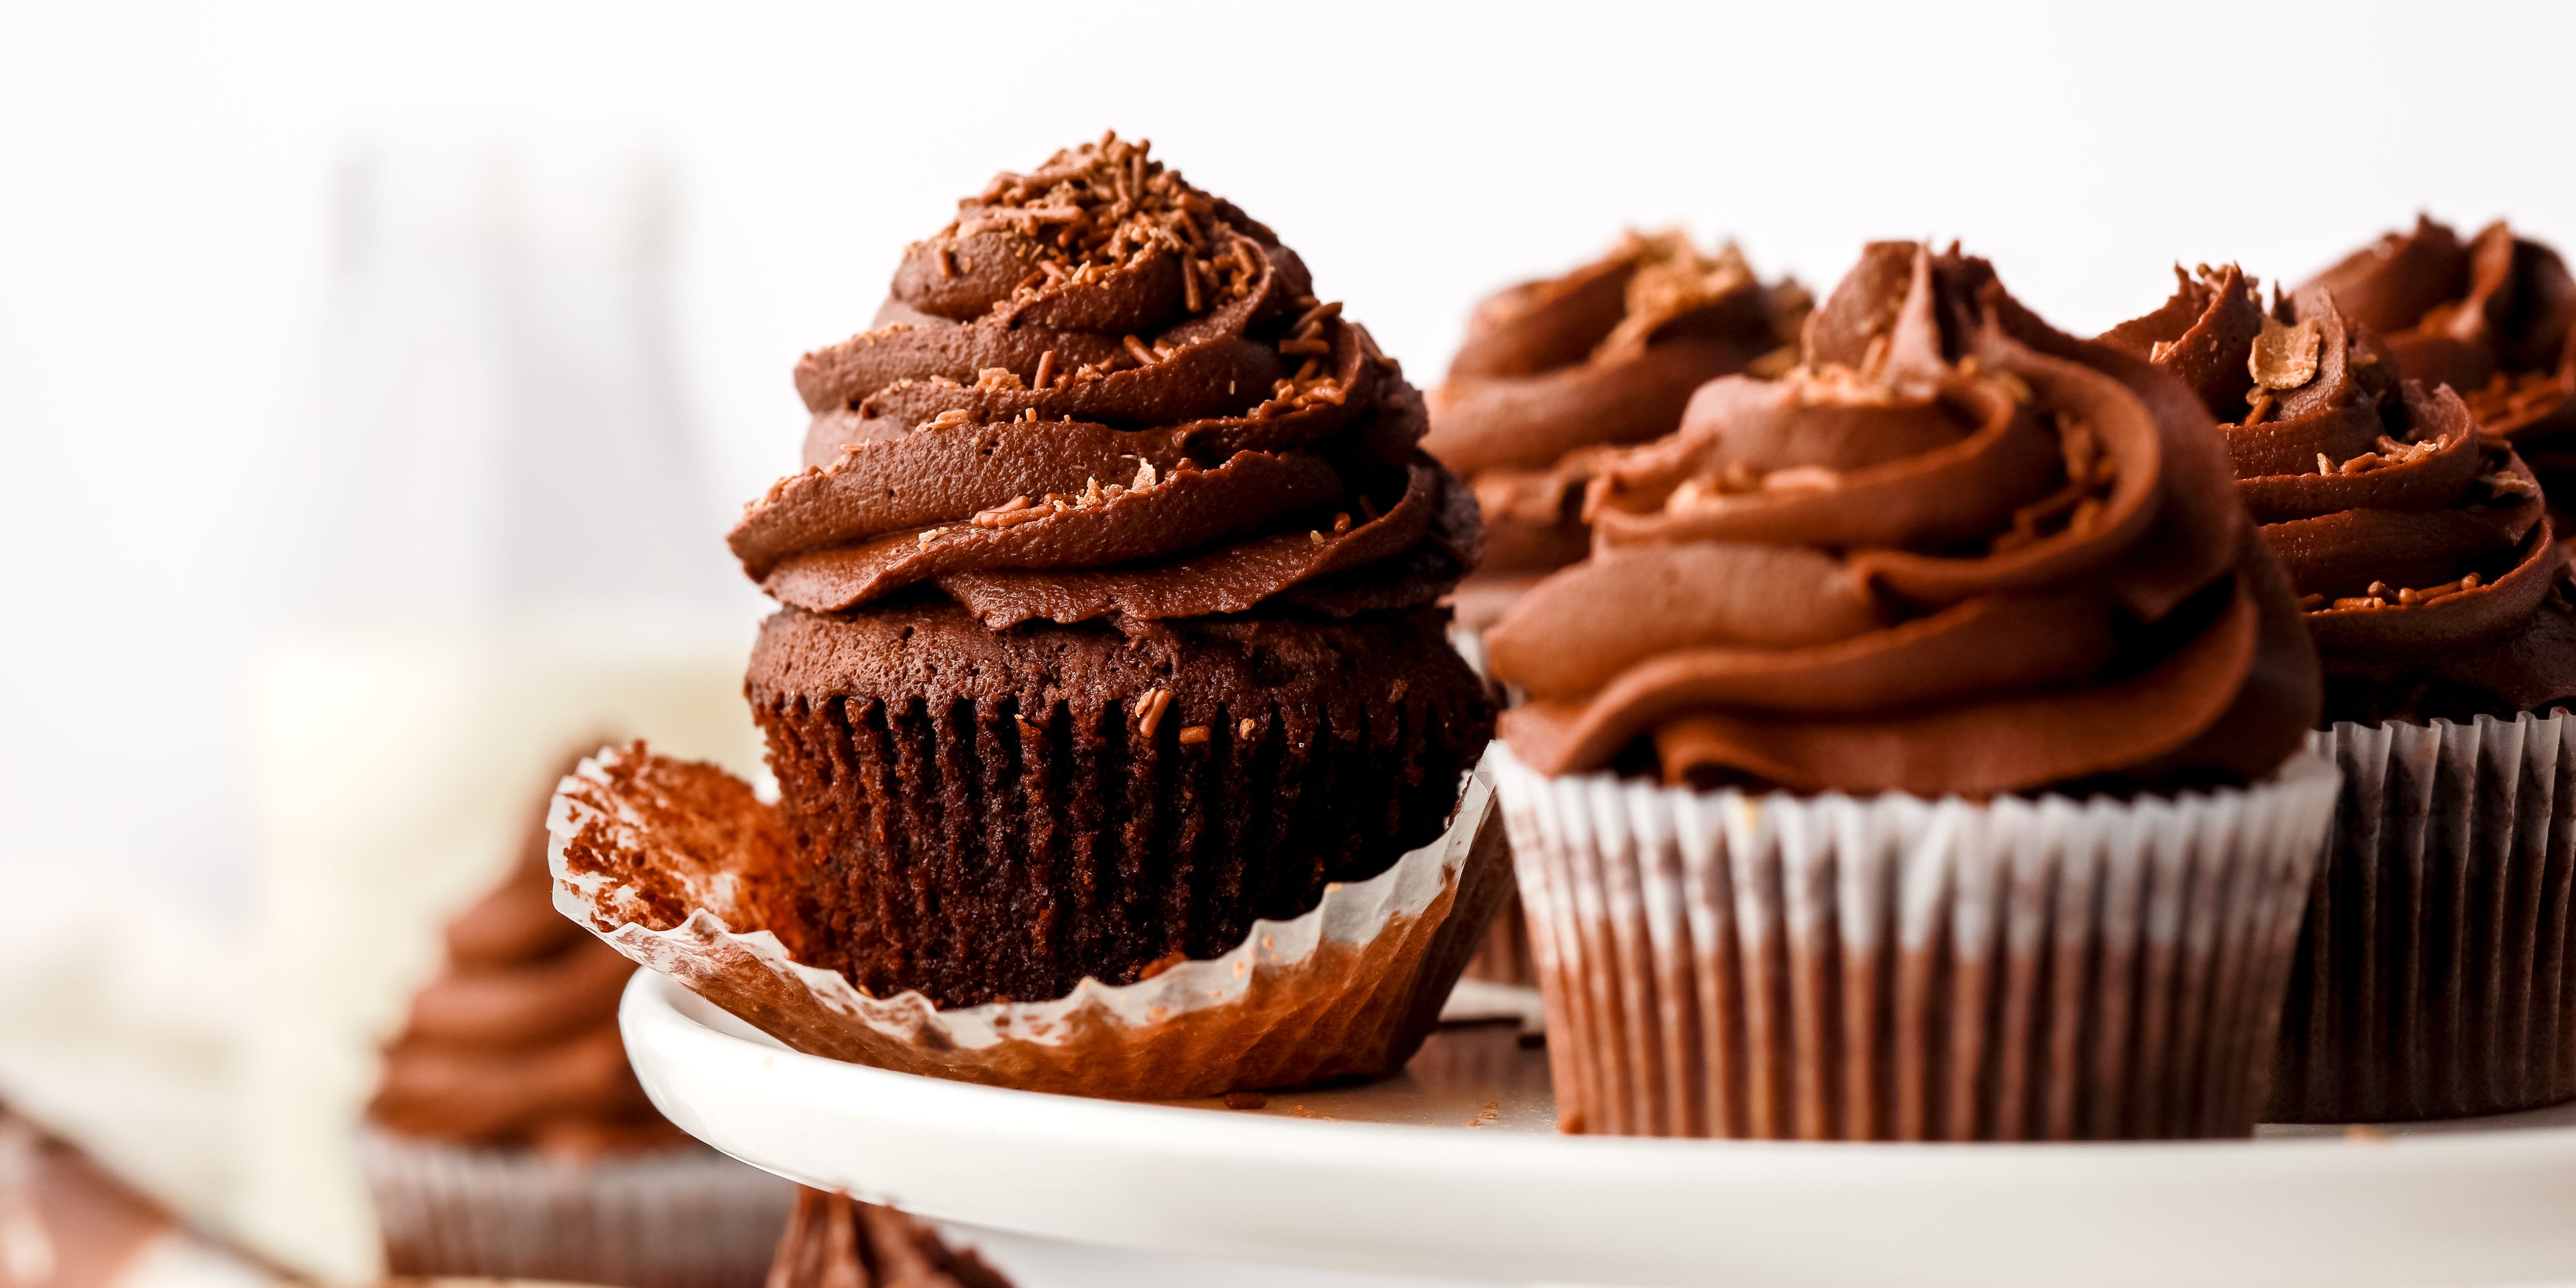 Chocolate cupcake with case peeled down